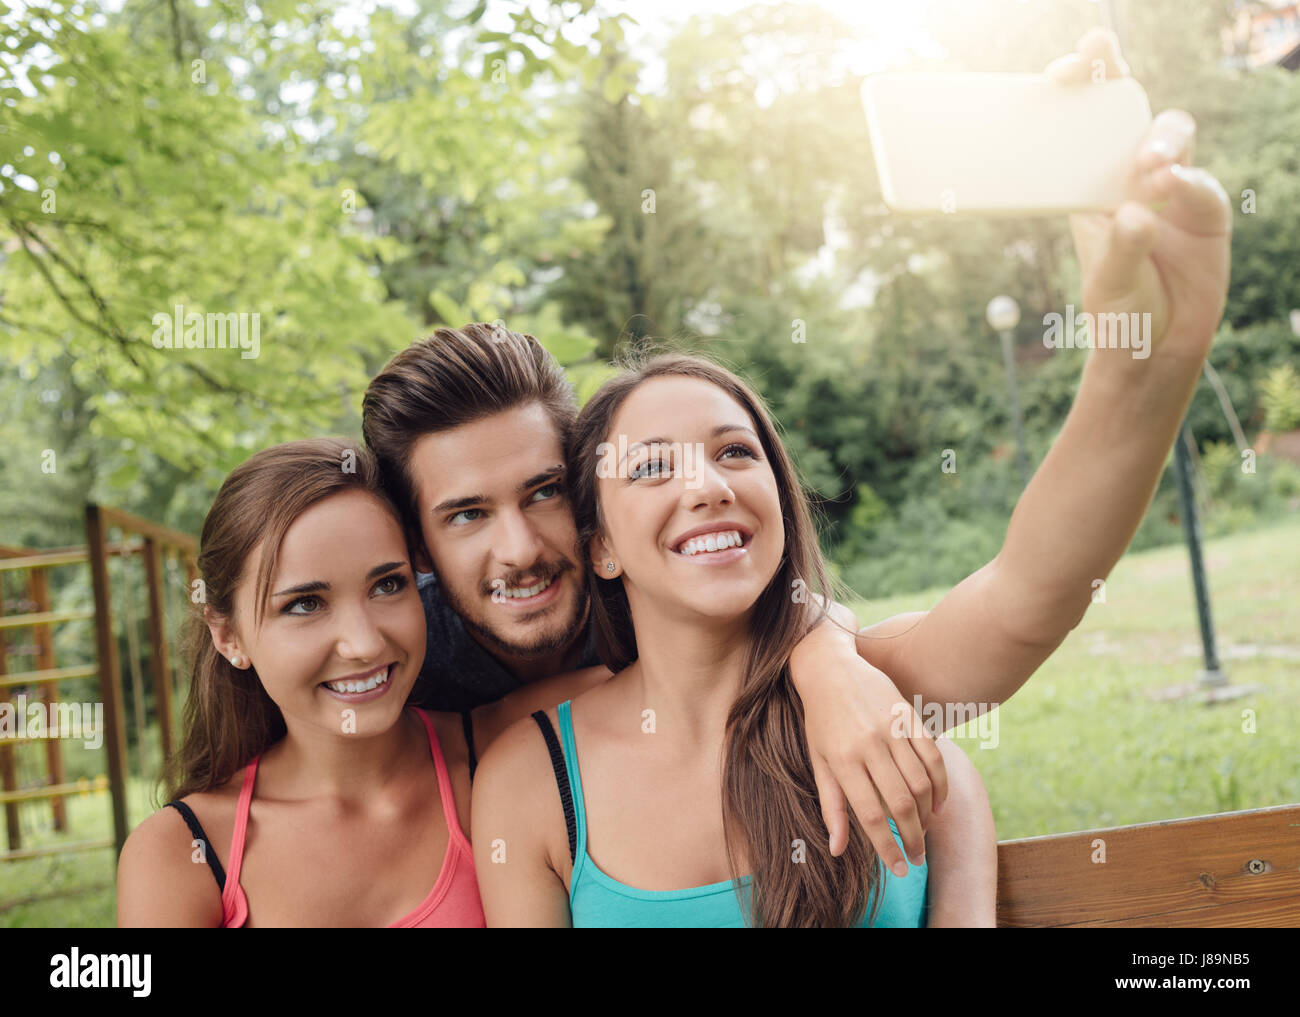 Cheerful smiling teens at the park sitting on a bench and taking selfies using a smart phone Stock Photo